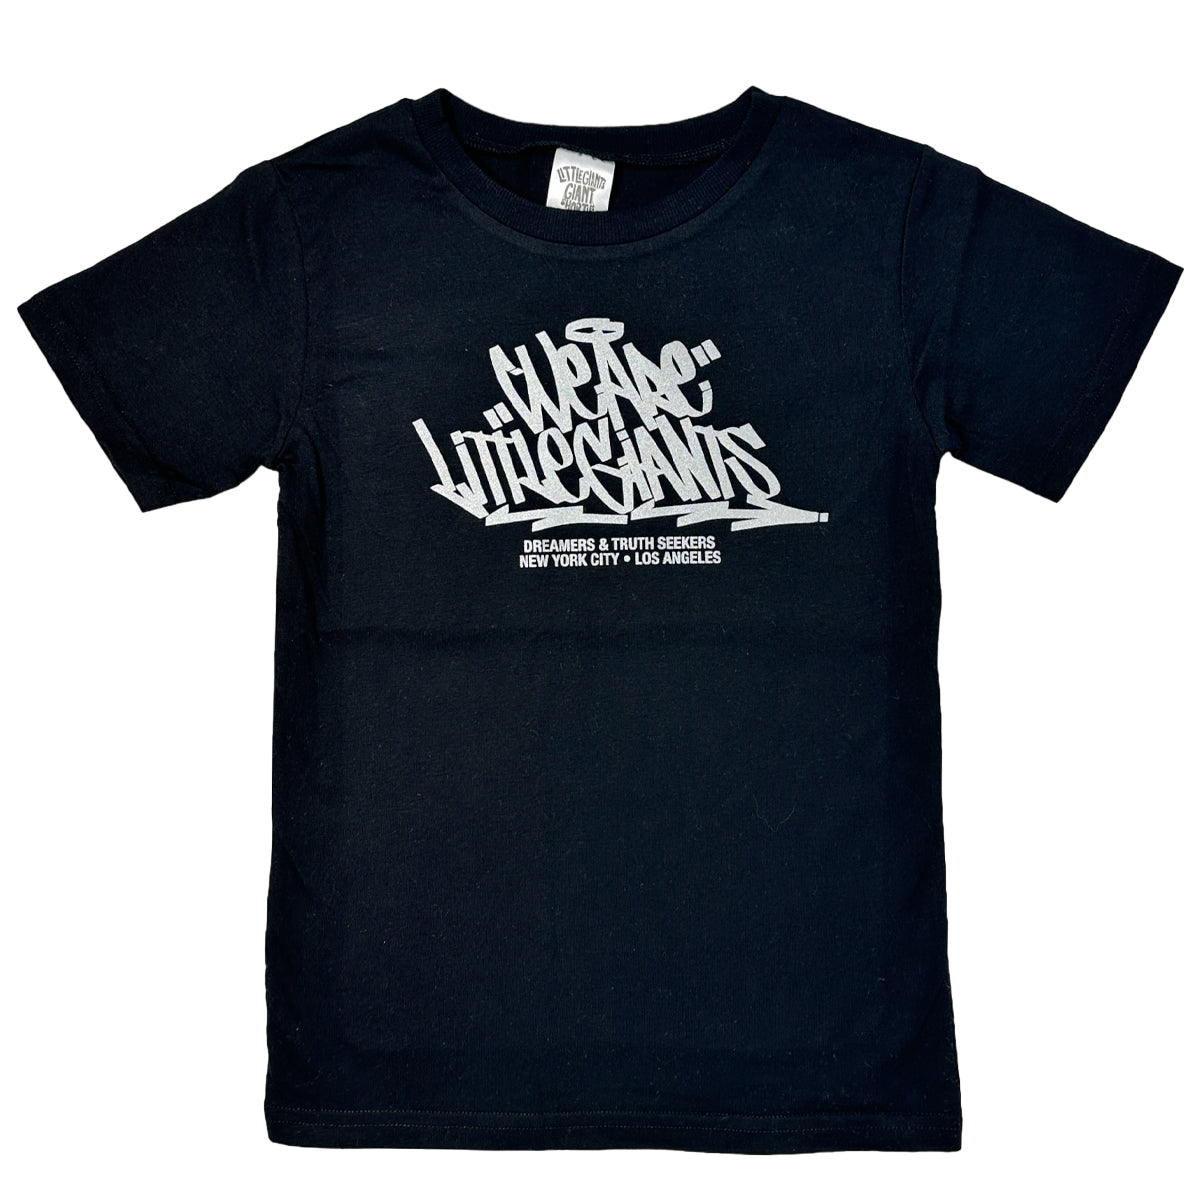 Dreamers and Truth Seekers T-Shirt (Black)